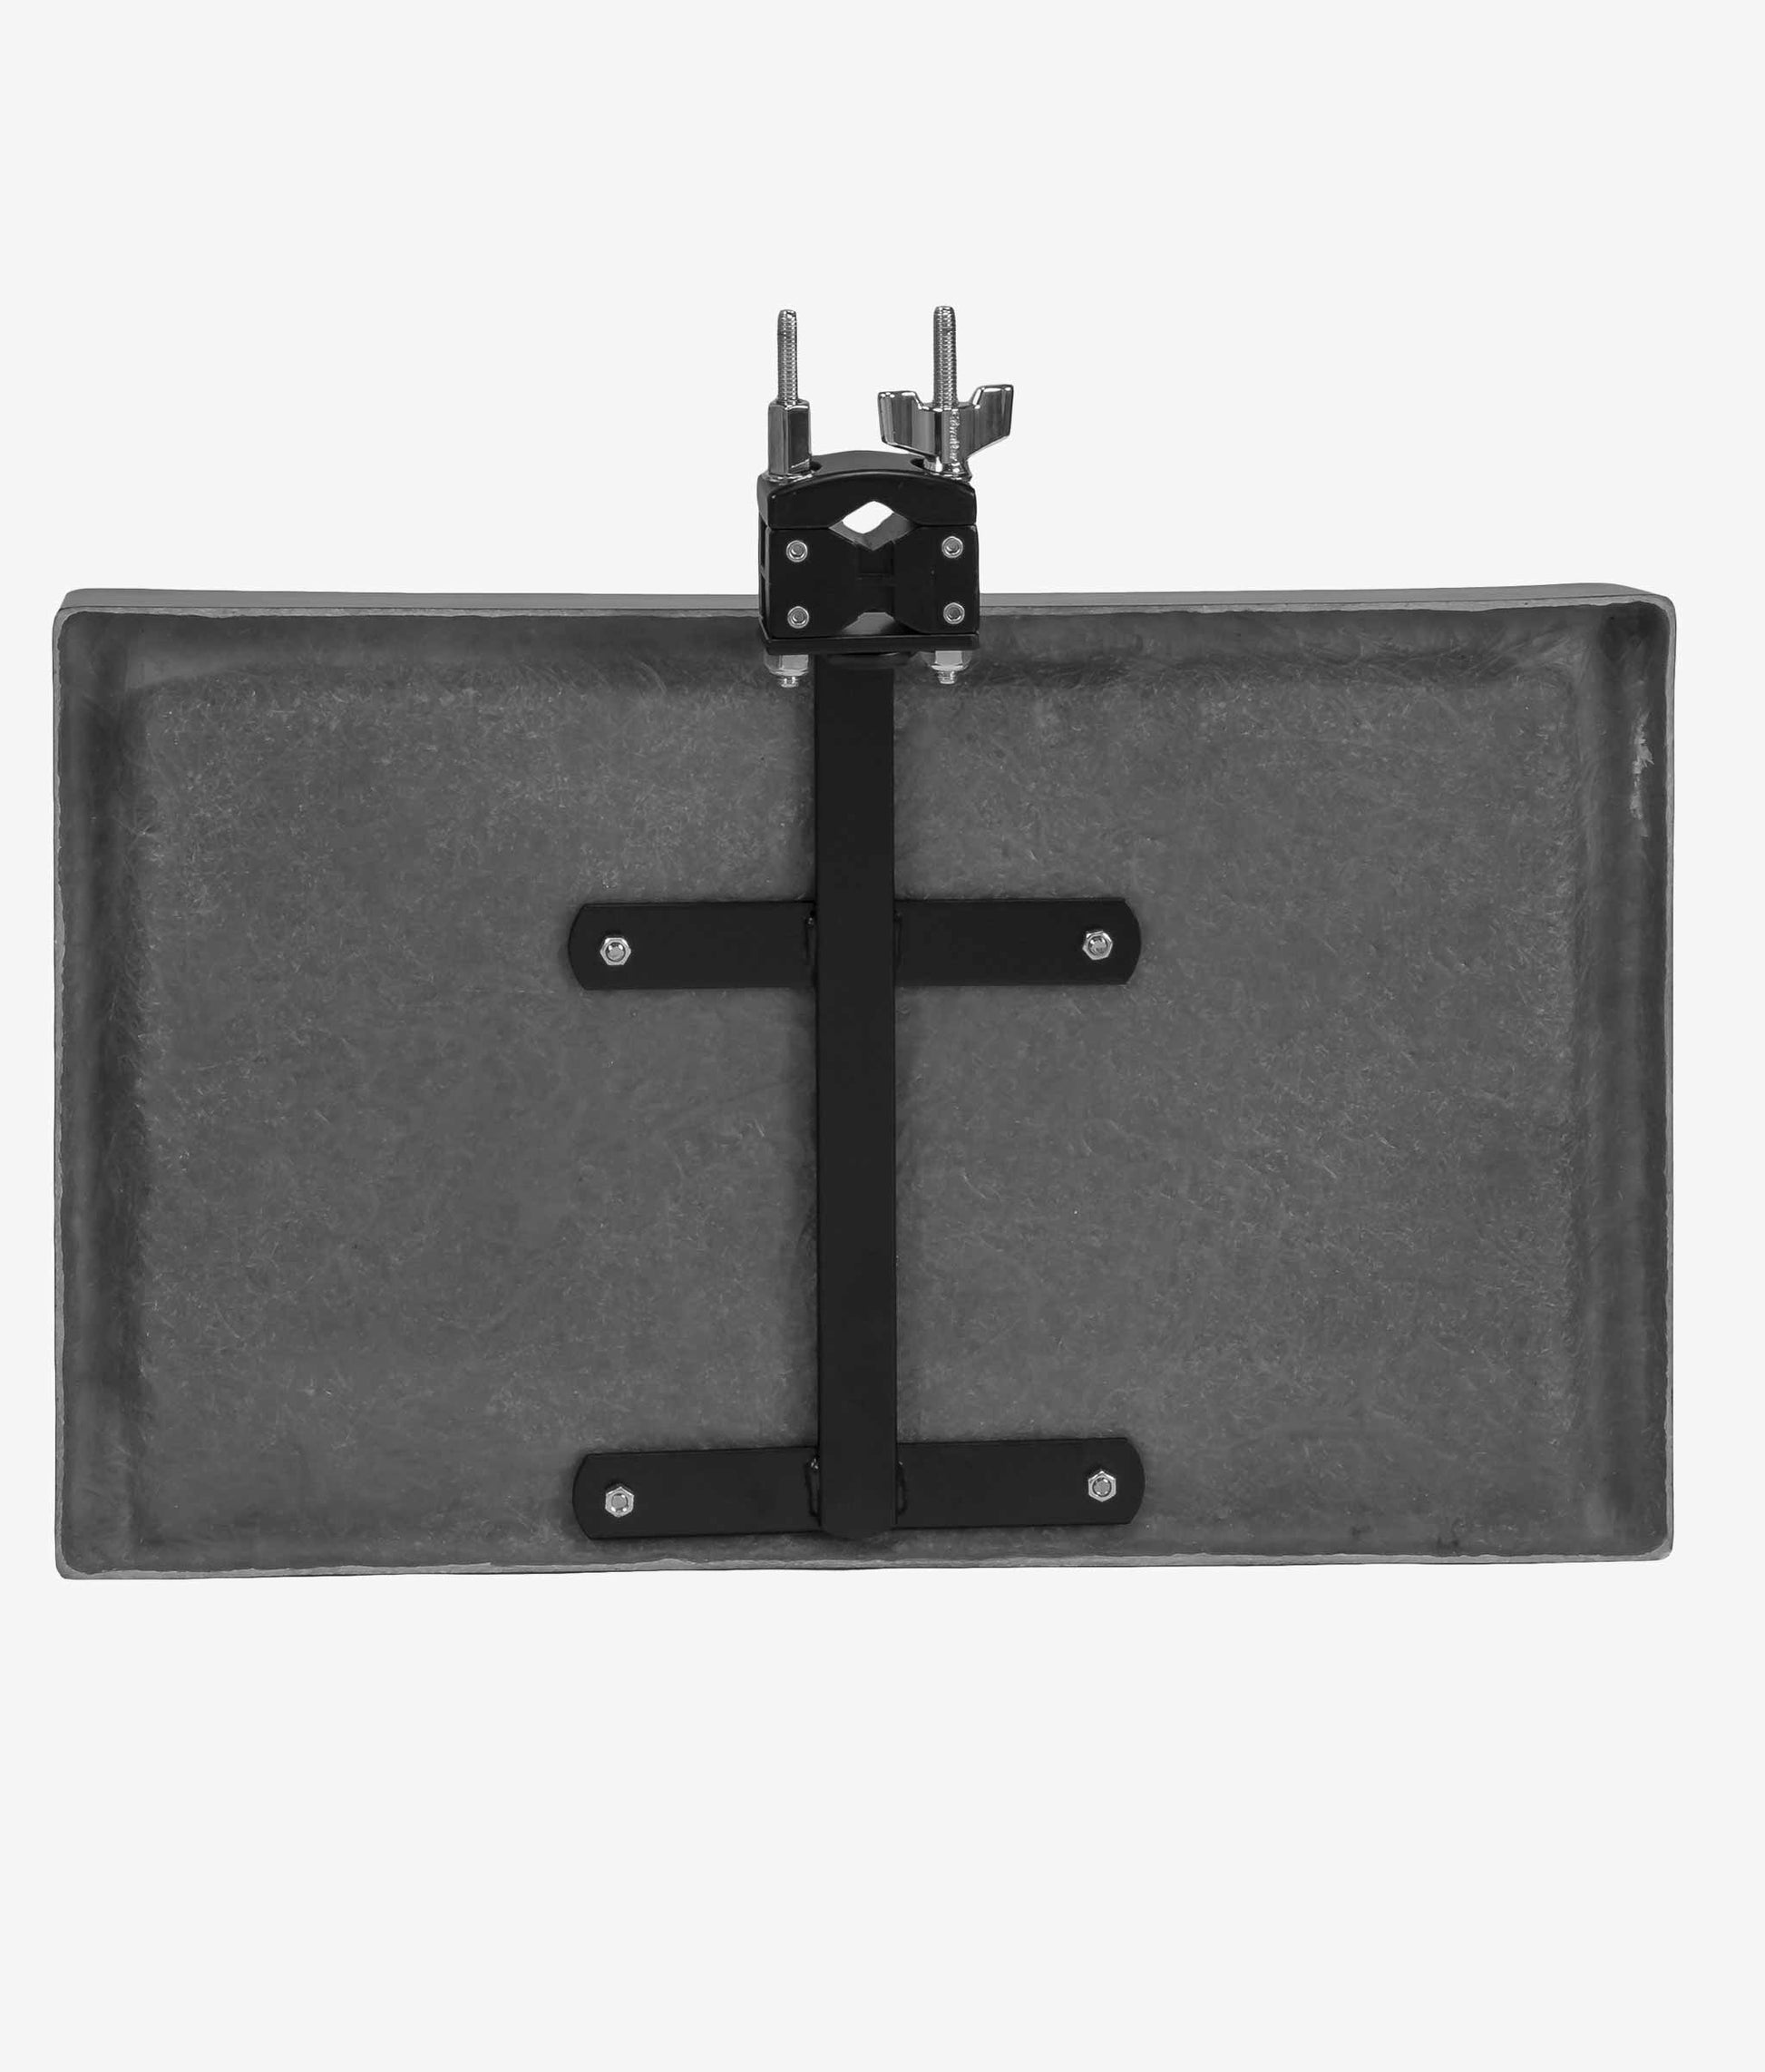  Gibraltar SC-PSE-MNT 16" x 10" Sidekick Essentials Fiberglass Tray with Clamp percussion table